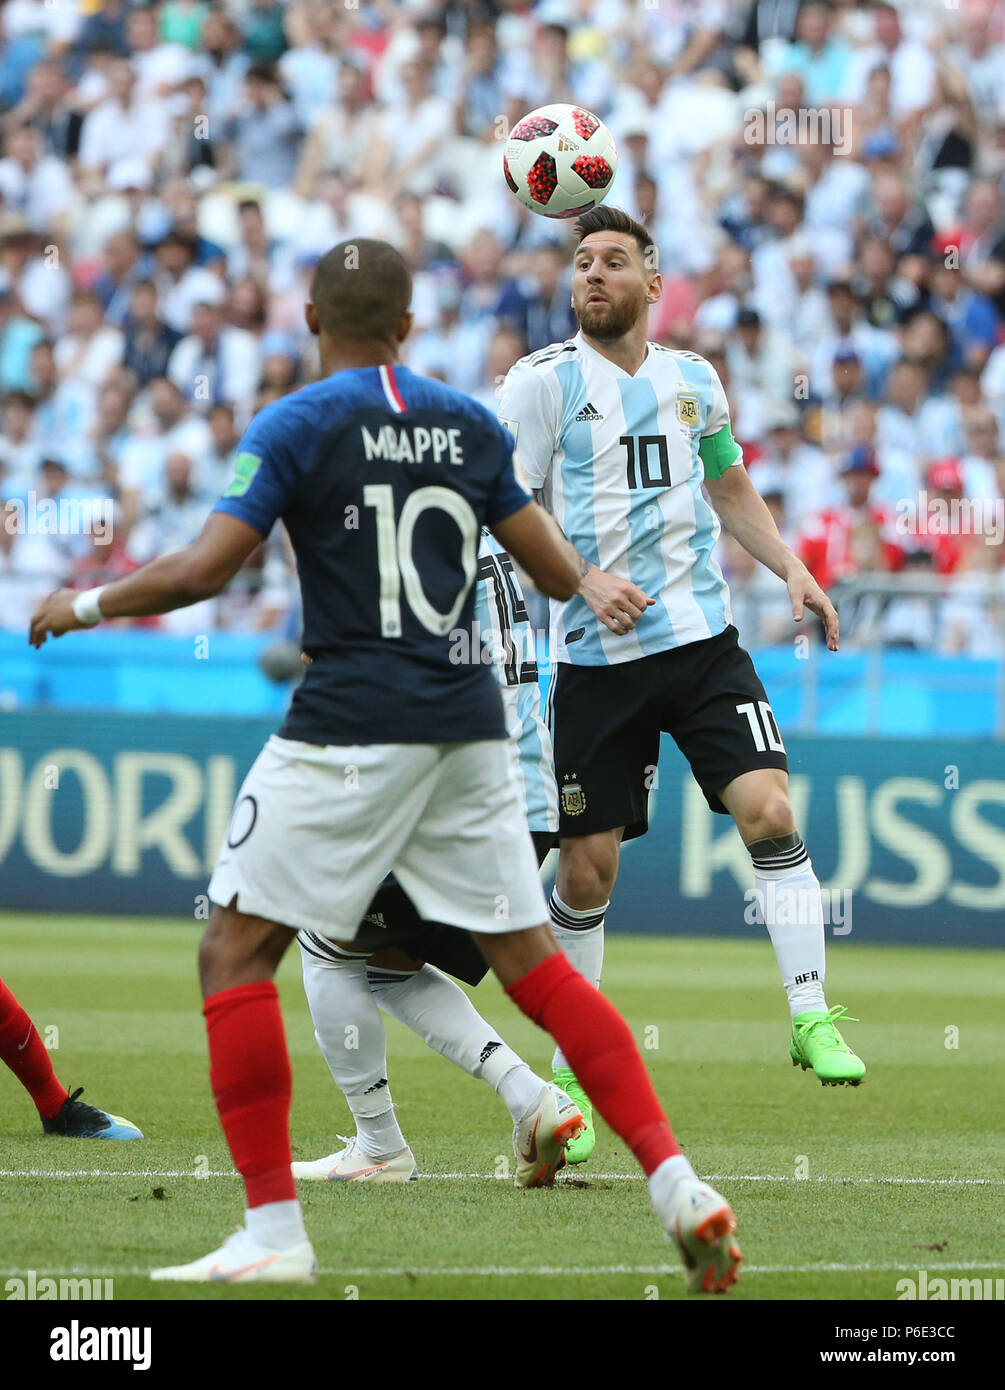 (180630) -- KAZAN, June 30, 2018 (Xinhua) -- Lionel Messi (R) of Argentina competes during the 2018 FIFA World Cup round of 16 match between France and Argentina in Kazan, Russia, June 30, 2018. (Xinhua/Li Ming) Stock Photo